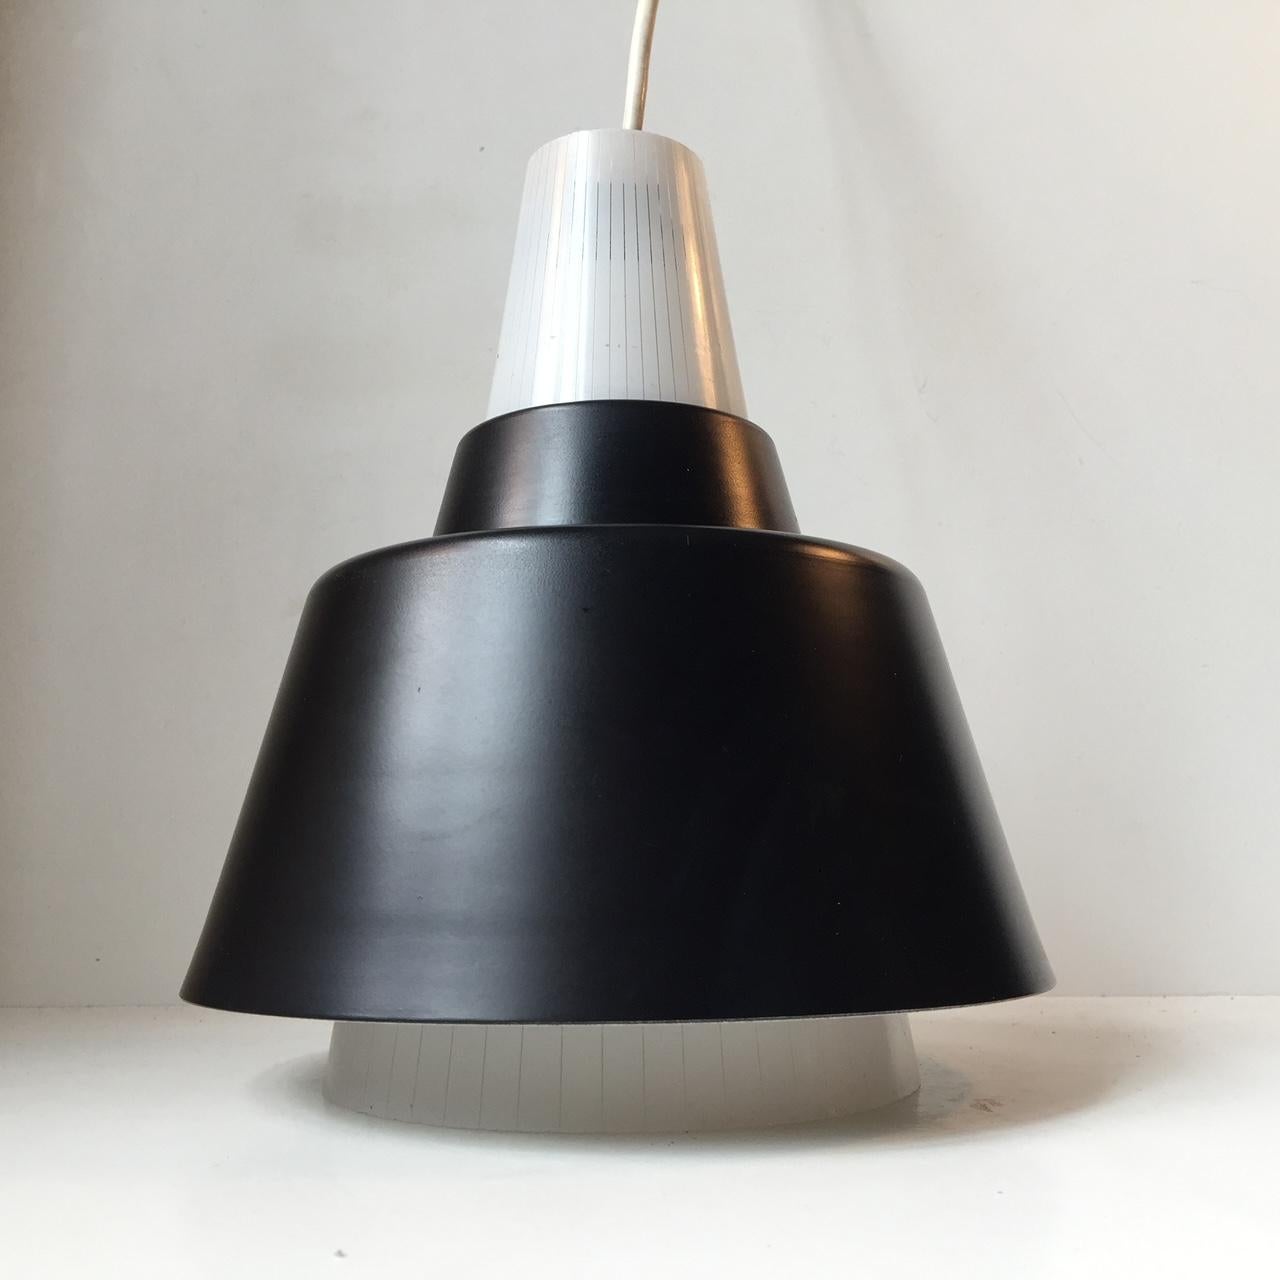 A Ballerina shaped pendant lamp composed of a black lacquered aluminium shade and a conical shade in pinstriped glass. It was made in Scandinavia during the 1940s probably by either Voss Belysning in Denmark or ASEA in Sweden. Measurements: H: 24,